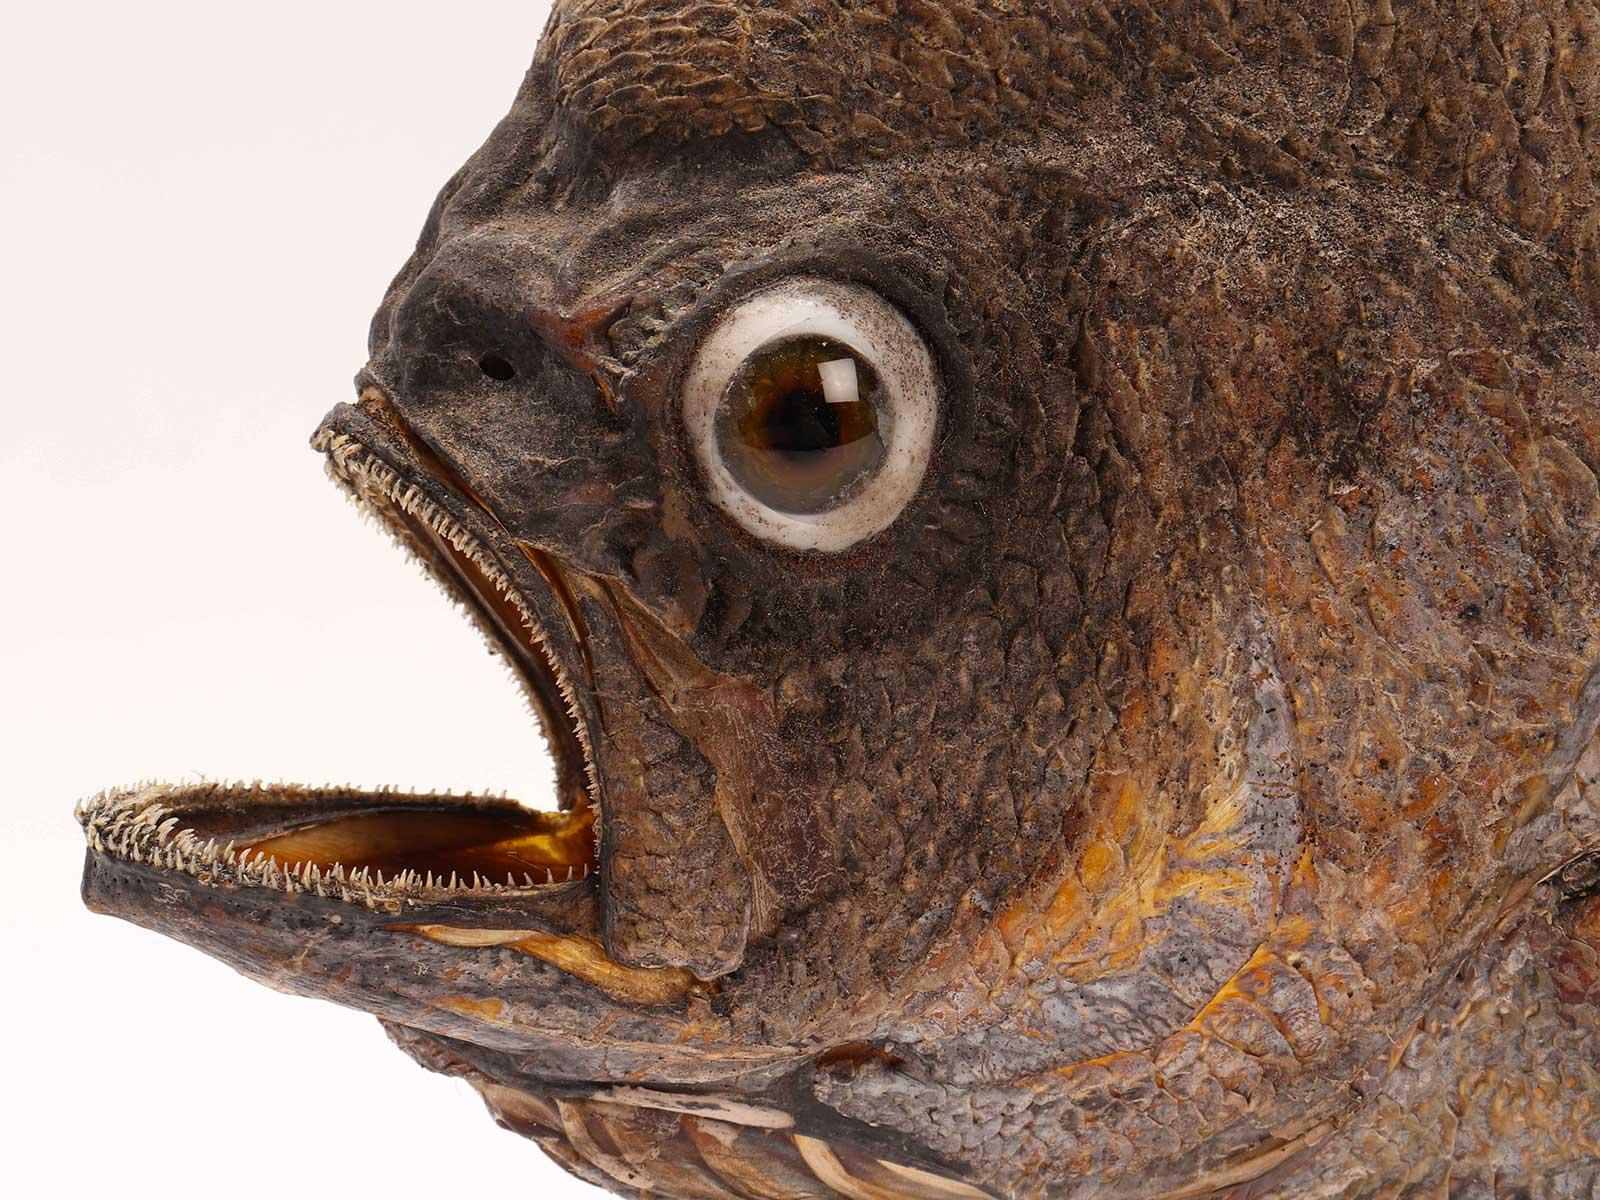 Taxidermy marine natural Wunderkammer specimen, embalmed sickle pomfret (Taractichthys Steinda Cheri). The Specimen is stuffed and mounted over a brass base. Sulfur glass eyes, Italy, circa 1880.